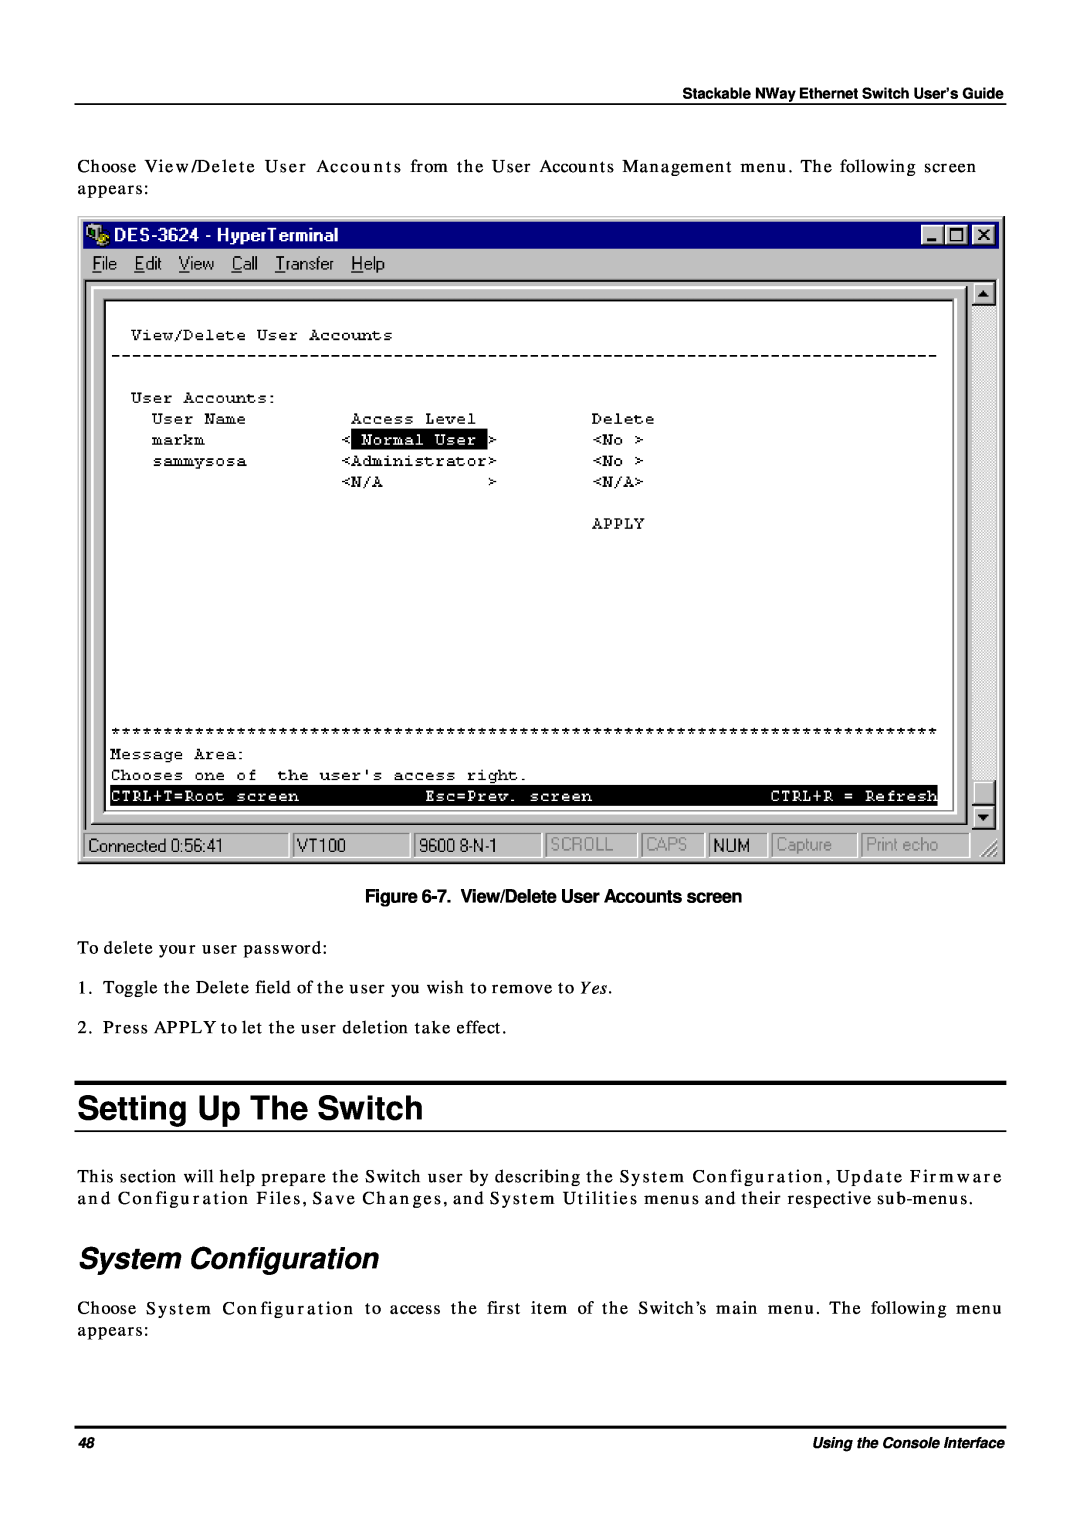 D-Link DES-3624 manual Setting Up The Switch, System Configuration, 7. View/Delete User Accounts screen 